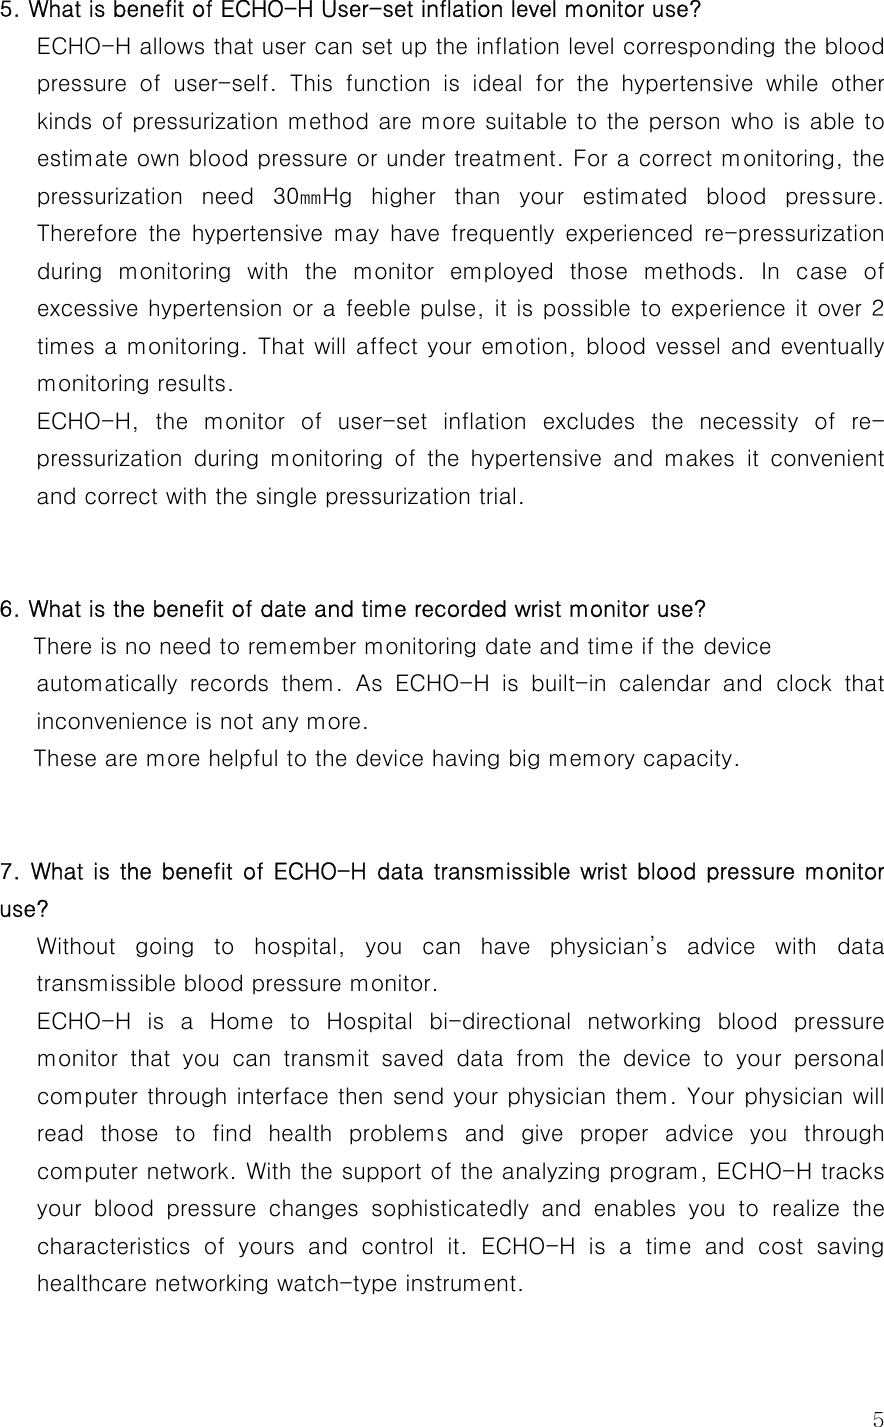  55. What is benefit of ECHO-H User-set inflation level monitor use?    ECHO-H allows that user can set up the inflation level corresponding the blood pressure  of  user-self.  This  function  is  ideal  for  the  hypertensive  while  other kinds of pressurization method are more suitable to the person who is able to estimate own blood pressure or under treatment. For a correct monitoring, the pressurization  need  30㎜Hg  higher  than  your  estimated  blood  pressure. Therefore  the  hypertensive  may  have  frequently  experienced  re-pressurization during  monitoring  with  the  monitor  employed  those  methods.  In  case  of excessive hypertension or a feeble pulse, it is possible to experience it over 2 times a monitoring. That will affect your emotion, blood vessel and eventually monitoring results.   ECHO-H,  the  monitor  of  user-set  inflation  excludes  the  necessity  of  re-pressurization  during  monitoring  of  the  hypertensive  and  makes  it  convenient and correct with the single pressurization trial.   6. What is the benefit of date and time recorded wrist monitor use?       There is no need to remember monitoring date and time if the device   automatically  records  them.  As  ECHO-H  is  built-in  calendar  and  clock  that inconvenience is not any more.   These are more helpful to the device having big memory capacity.    7. What is the benefit of ECHO-H data transmissible wrist blood  pressure monitor use? Without  going  to  hospital,  you  can  have  physician’s  advice  with data transmissible blood pressure monitor.   ECHO-H is a Home to Hospital bi-directional networking blood pressure monitor that you can transmit saved data from the device to your  personal computer through interface then send your physician them. Your physician will read those to find health problems and give proper advice you through computer network. With the support of the analyzing program, ECHO-H tracks your blood pressure changes sophisticatedly and enables you to realize  the characteristics  of  yours  and  control  it. ECHO-H is a time and cost saving healthcare networking watch-type instrument.  